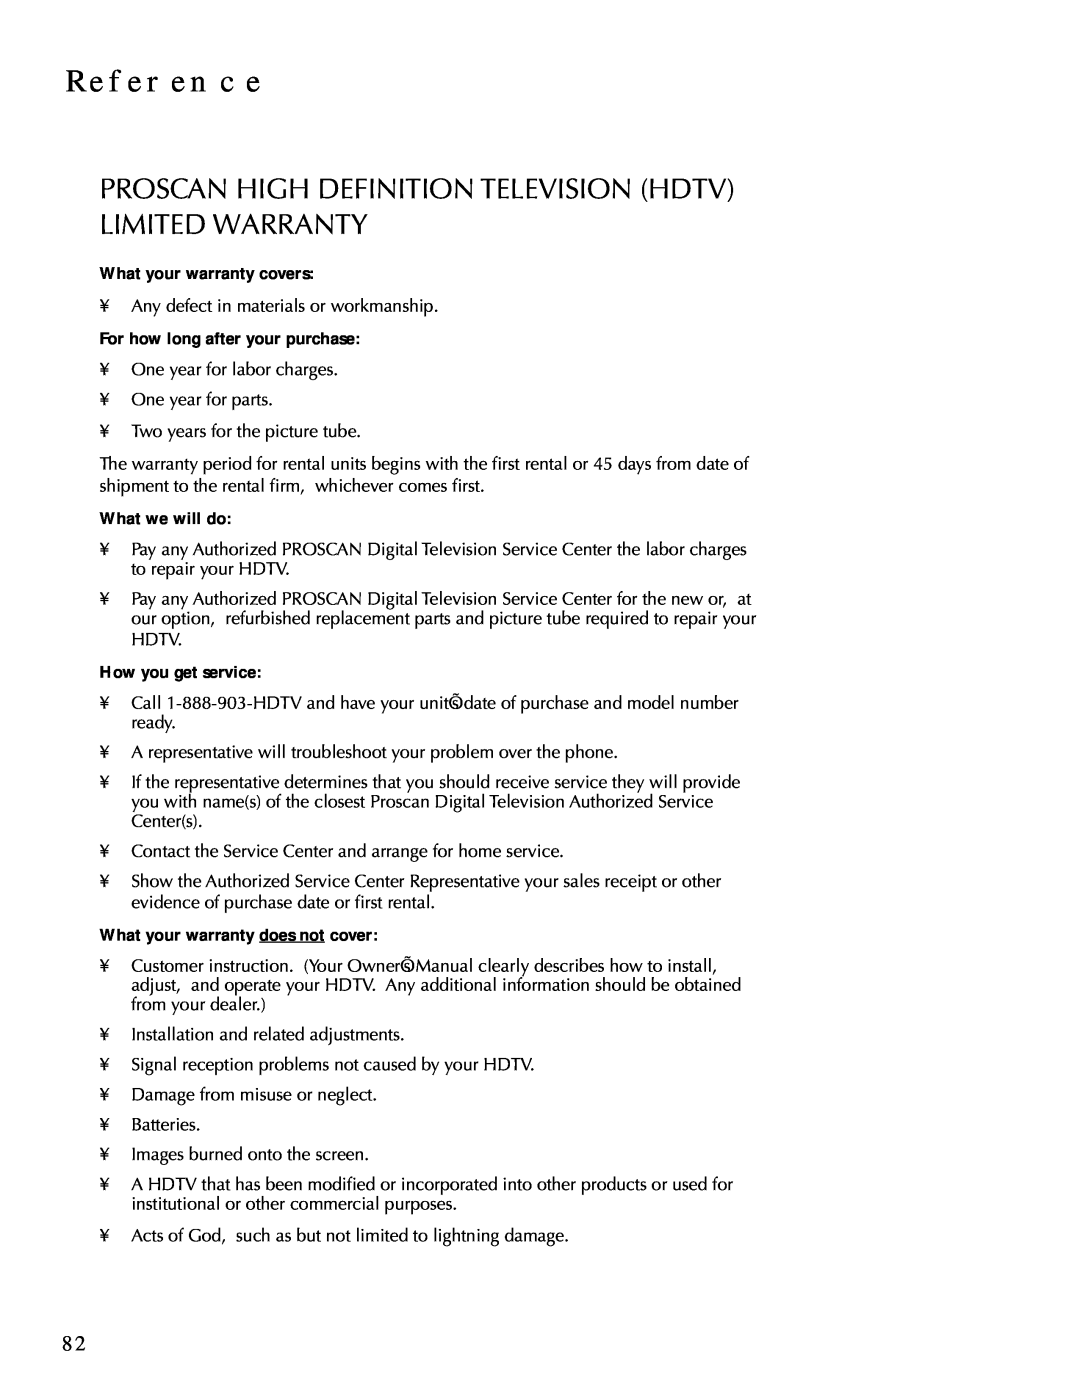 DirecTV HDTV user manual Proscan High Definition Television Hdtv Limited Warranty, Reference, What your warranty covers 